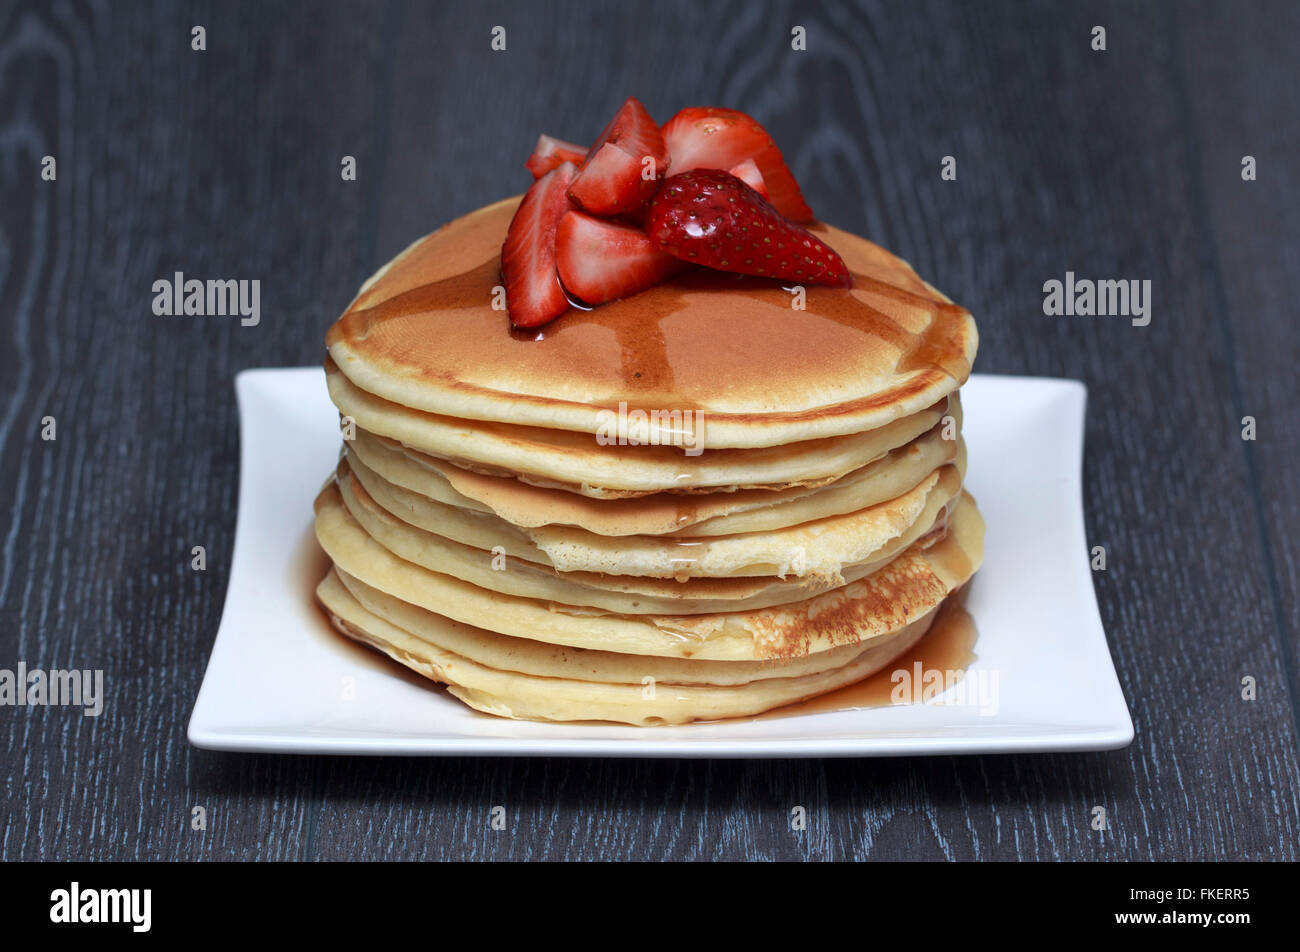 Stack of pancakes with strawberry on dark wooden background Stock Photo